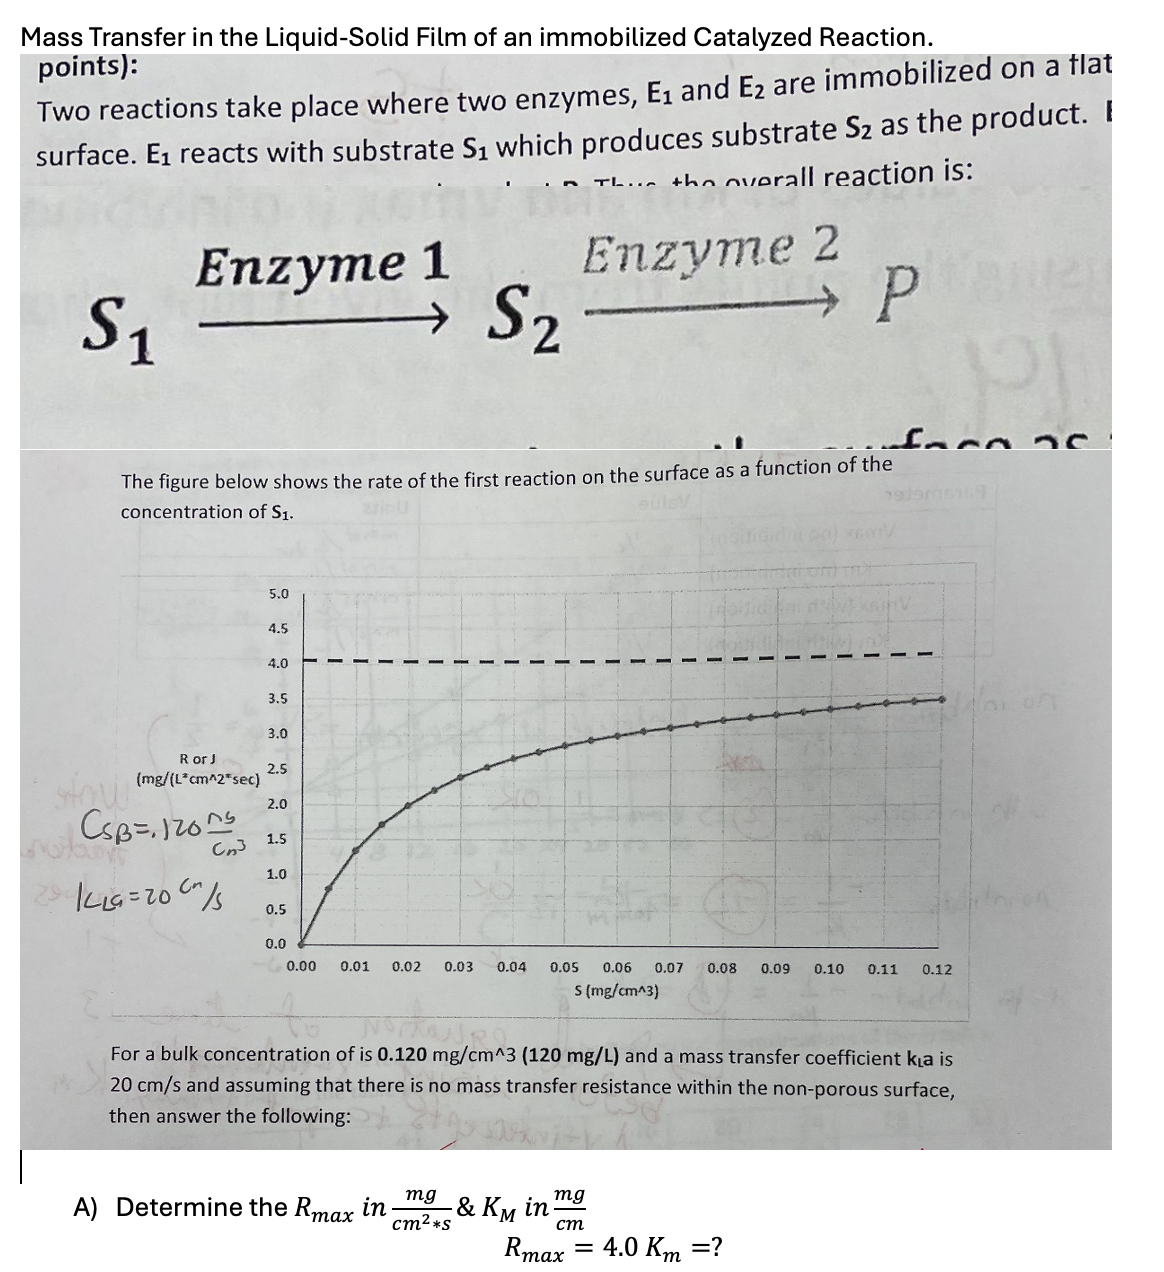 Mass Transfer in the Liquid-Solid Film of an immobilized Catalyzed Reaction.
points):
Two reactions take place where two enzymes, E₁ and E₂ are immobilized on a flat
surface. E₁ reacts with substrate S₁ which produces substrate S₂ as the product. I
.. the overall reaction is:
S₁
The figure below shows the rate of the first reaction on the surface as a function of the
concentration of S1.
Enzyme 1
R or J
(mg/(L*cm^2*sec)
F|CSB=₁12015
231419=20C/5
C₂3
5.0
4.5
4.0
3.5
3.0
2.5
2.0
1.5
1.0
0.5
0.0
T
I
T
I
A) Determine the Rmax in
S₂
I
mg
cm²*s
0.00 0.01 0.02 0.03 0.04 0.05 0.06 0.07 0.08 0.09 0.10 0.11 0.12
S (mg/cm^3)
Enzyme 2
→ P
For a bulk concentration of is 0.120 mg/cm^3 (120 mg/L) and a mass transfer coefficient ka is
20 cm/s and assuming that there is no mass transfer resistance within the non-porous surface,
then answer the following:
foon 25
mg
cm
Rmax = 4.0 Km =?
& KM in
dni on